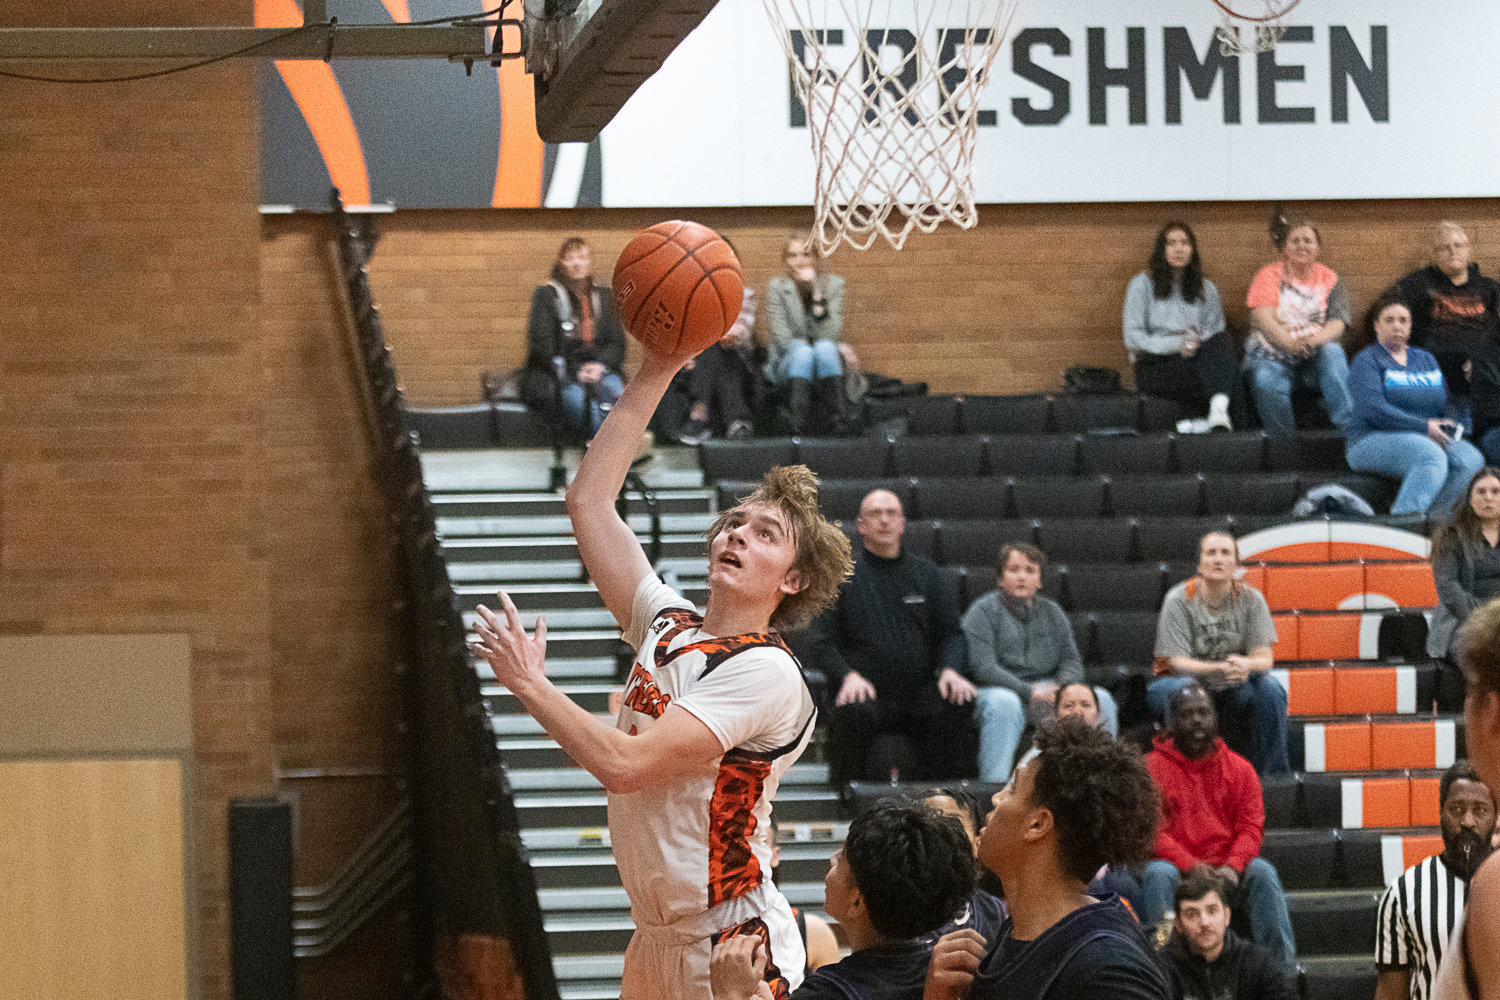 Cohen Ballard puts up an acrobatic shot during the first half of Centralia's 56-34 loss to Heritage on Dec. 2.